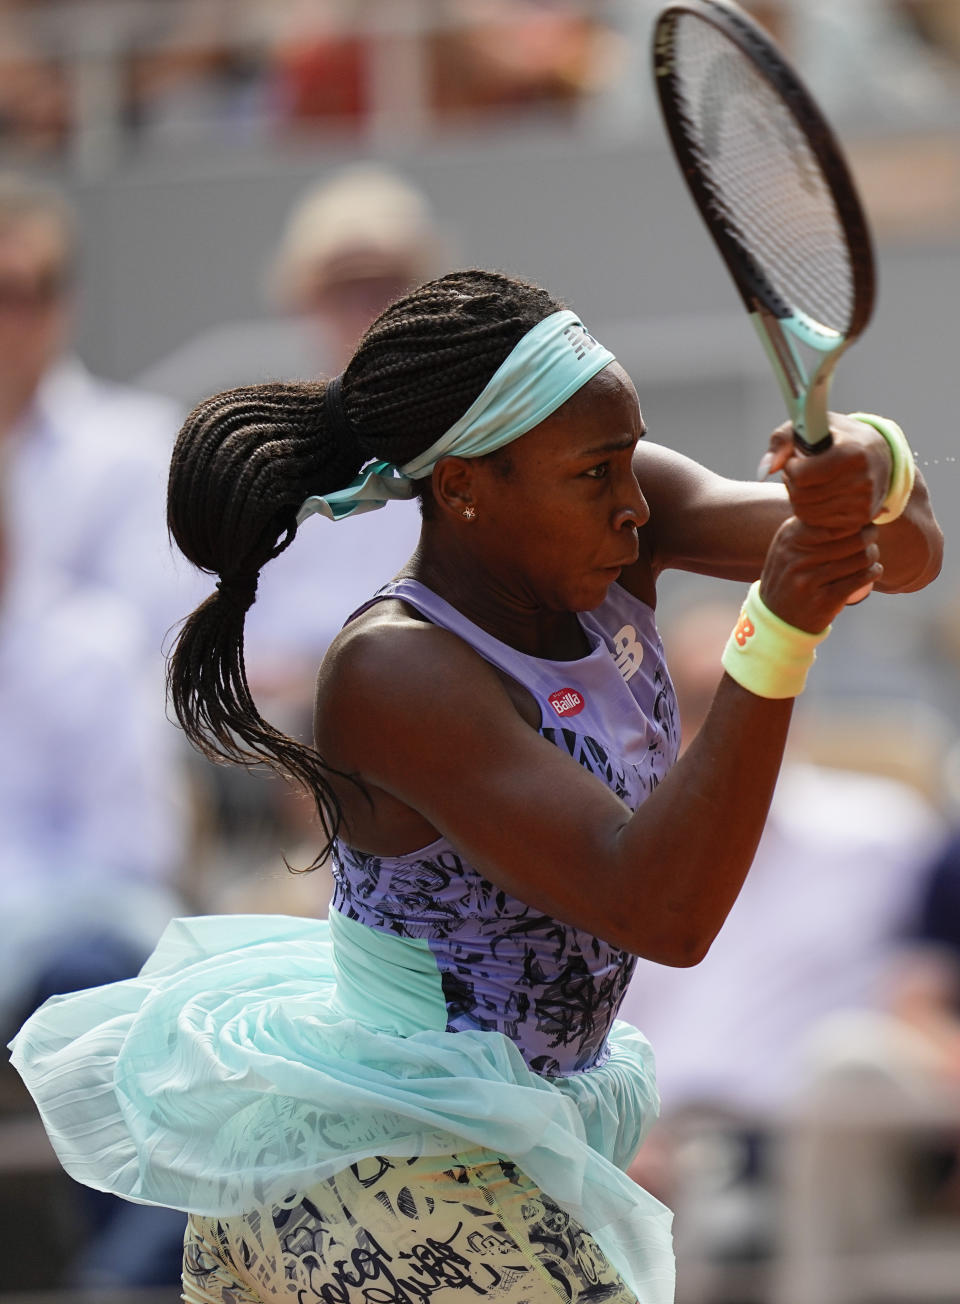 Coco Gauff of the U.S. plays a shot against Italy's Martina Trevisan during their semifinal match at the French Open tennis tournament in Roland Garros stadium in Paris, France, Thursday, June 2, 2022. (AP Photo/Michel Euler)